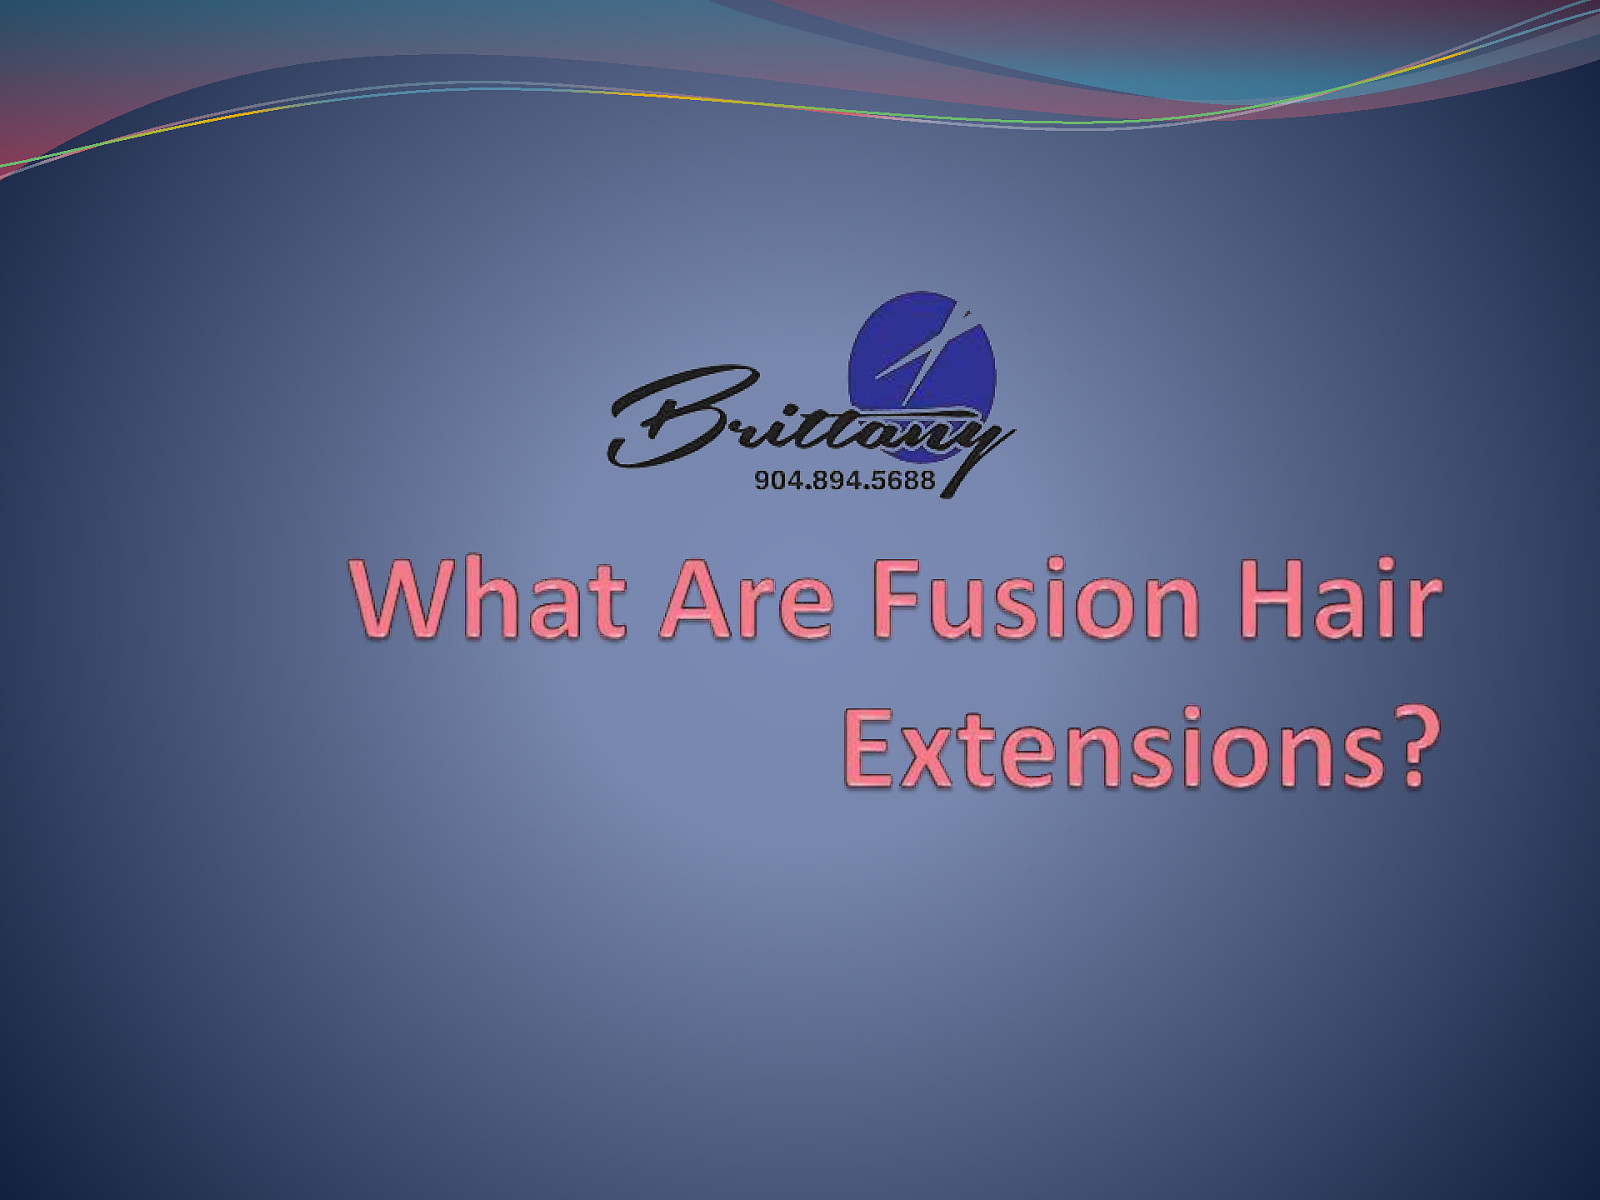 What Are Fusion Hair Extensions? Transform Your Look at Brittany Hair Salon